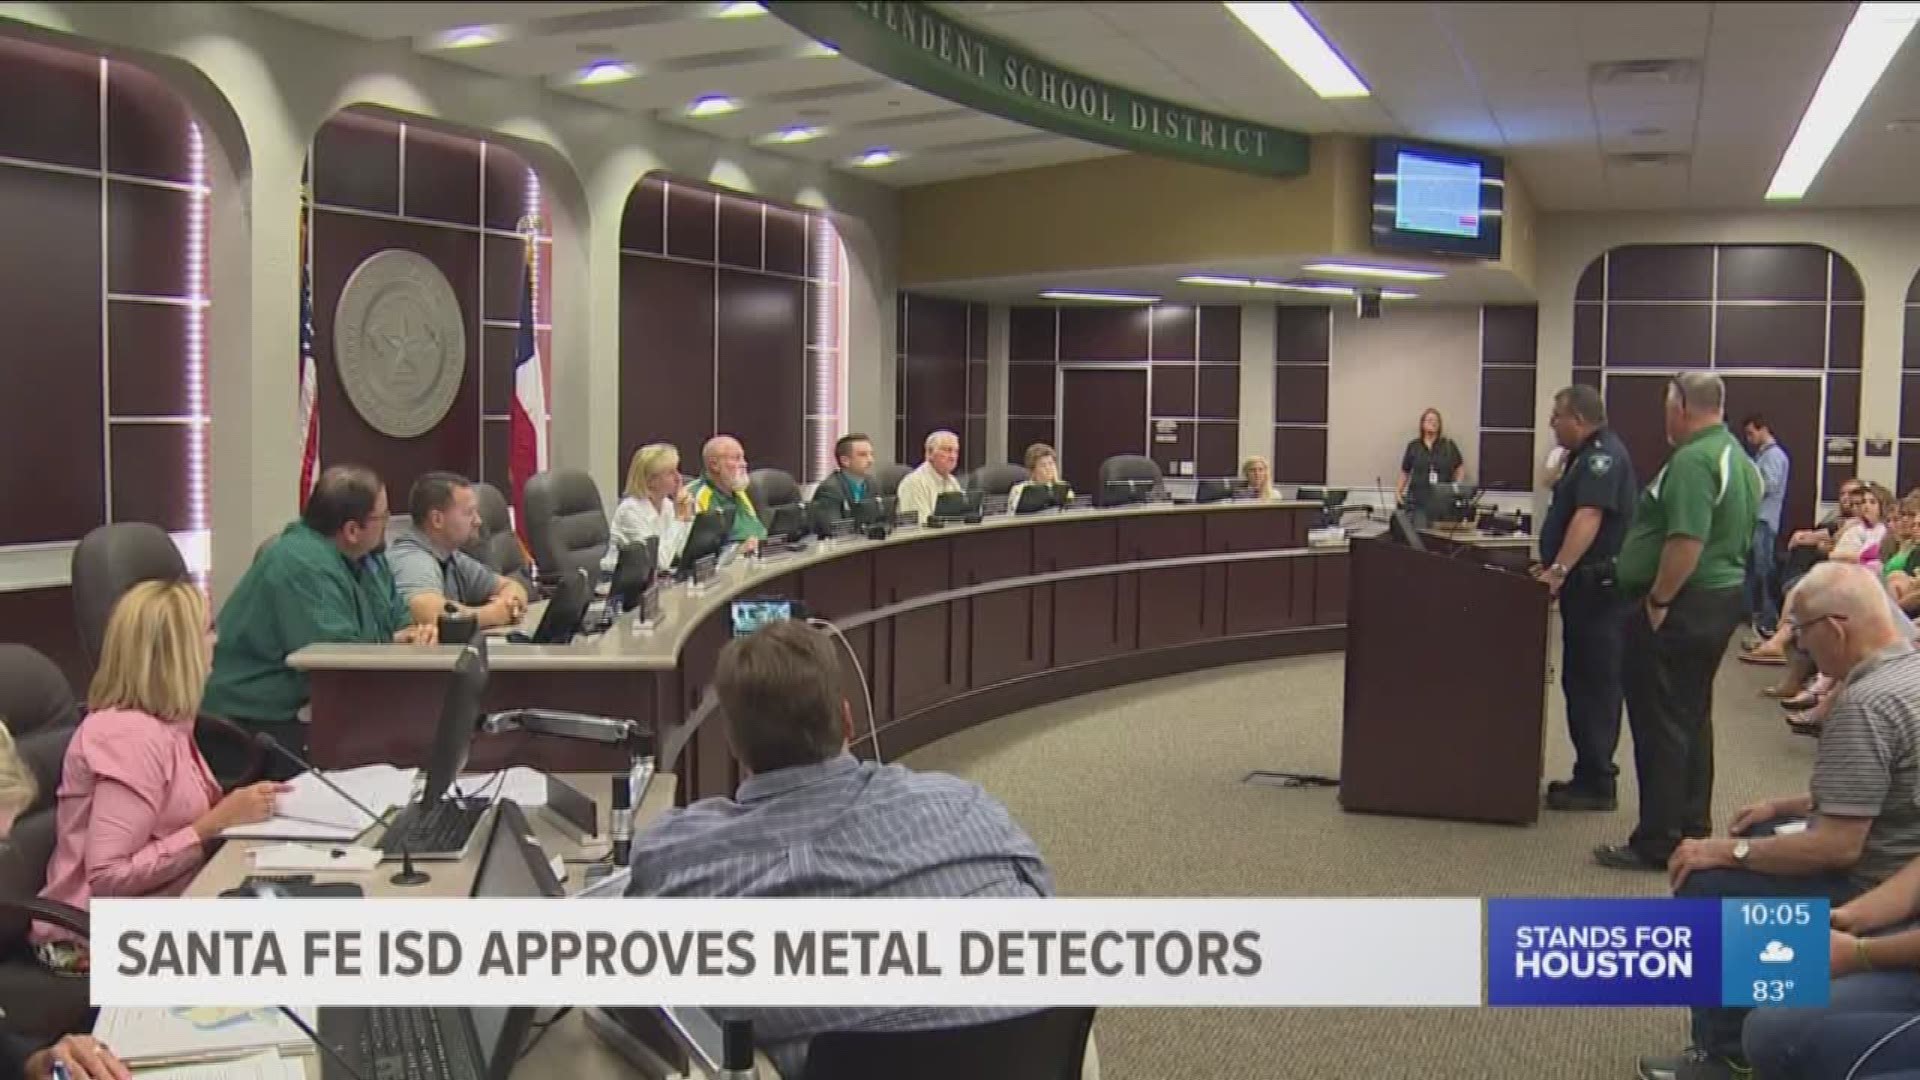 A plan is finally in the works to start installing metal detectors at schools in Santa Fe ISD. This comes more than two months after the deadly shooting at Santa Fe High School.